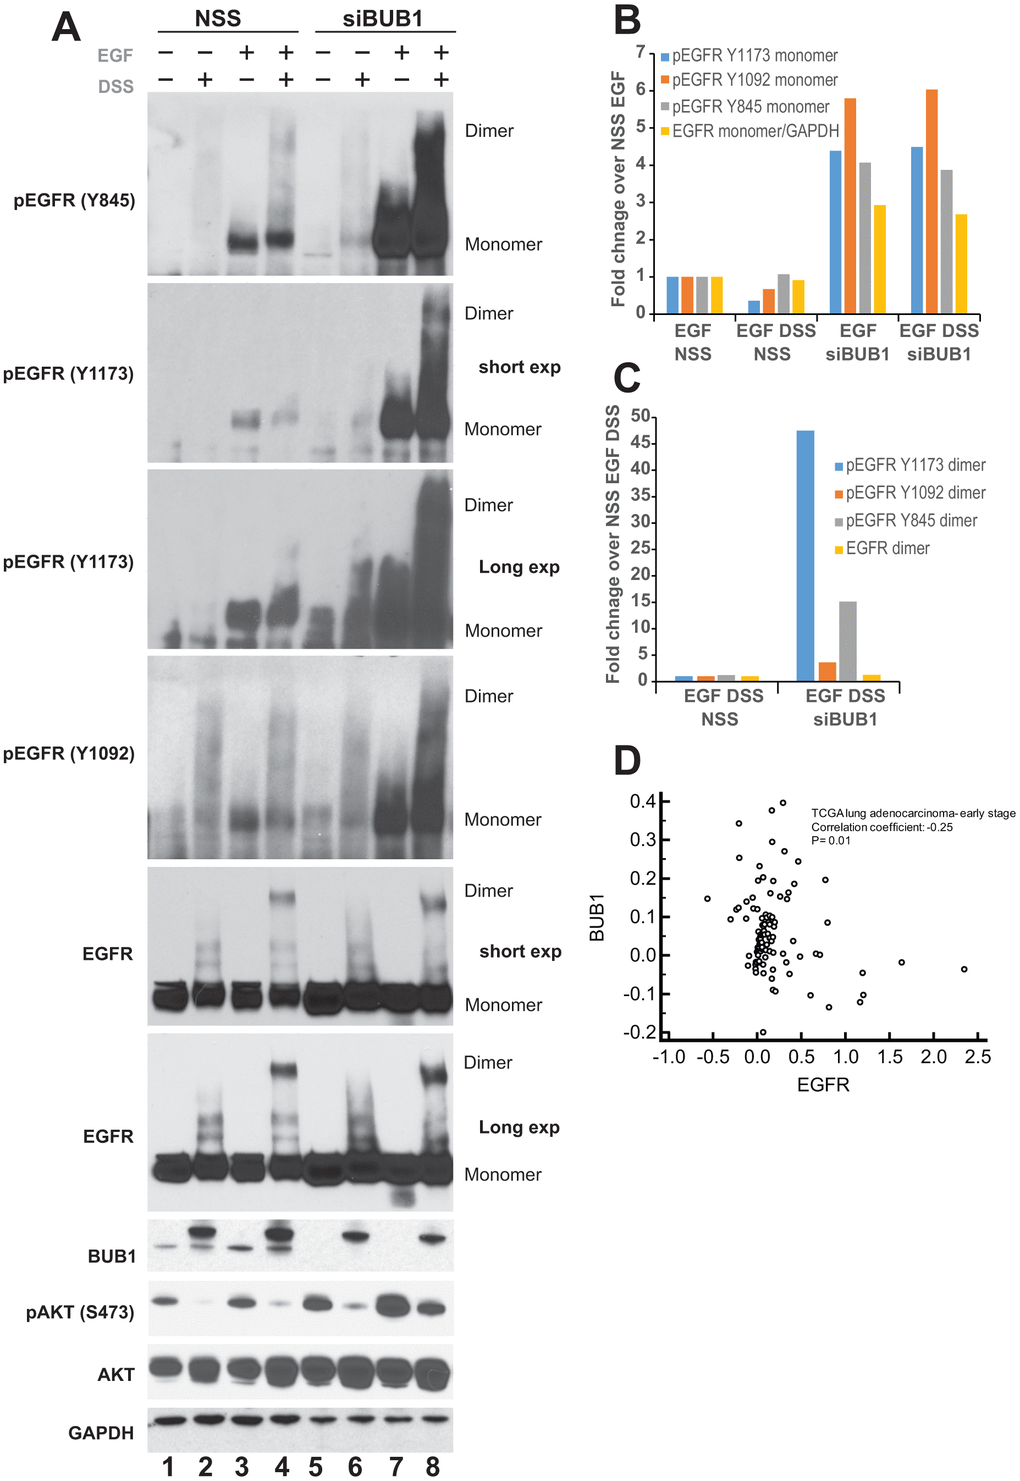 BUB1 depletion stabilizes EGFR. (A) A549 cells were transfected with non-targeting control scrambled (NSS) siRNA or BUB1siRNA. 48 hours post-transfection cells were cross-linked with 100 μM DSS for 30 minutes followed by 30 ng/mL EGF for an additional 30 minutes. Resulting lysates were resolved on SDS-PAGE gels and probed with indicated antibodies. (B) Quantitation of western blots from (A) only the monomer species of EGFR is plotted. Control siRNA (NSS) transfected, EGF treated lanes were set as 1 fold and used as a baseline for estimating fold enrichment in other samples. (C) Quantitation of pEGFR and EGFR dimers from SDS and EGF treated lanes only (lanes 4 and 8 only in A). NSS transfected lane was set as 1 fold and used as a baseline for estimating fold enrichment in BUB1 siRNA transfected samples. (D) Gene expression values from non-metastatic adenocarcinoma samples (N=331) from TCGA lung dataset were log2 transformed and median centered and correlation coefficient (r) was calculated. BUB1 and EGFR expression is expressed as log2 transformed values. Correlation coefficient and p-value are listed.